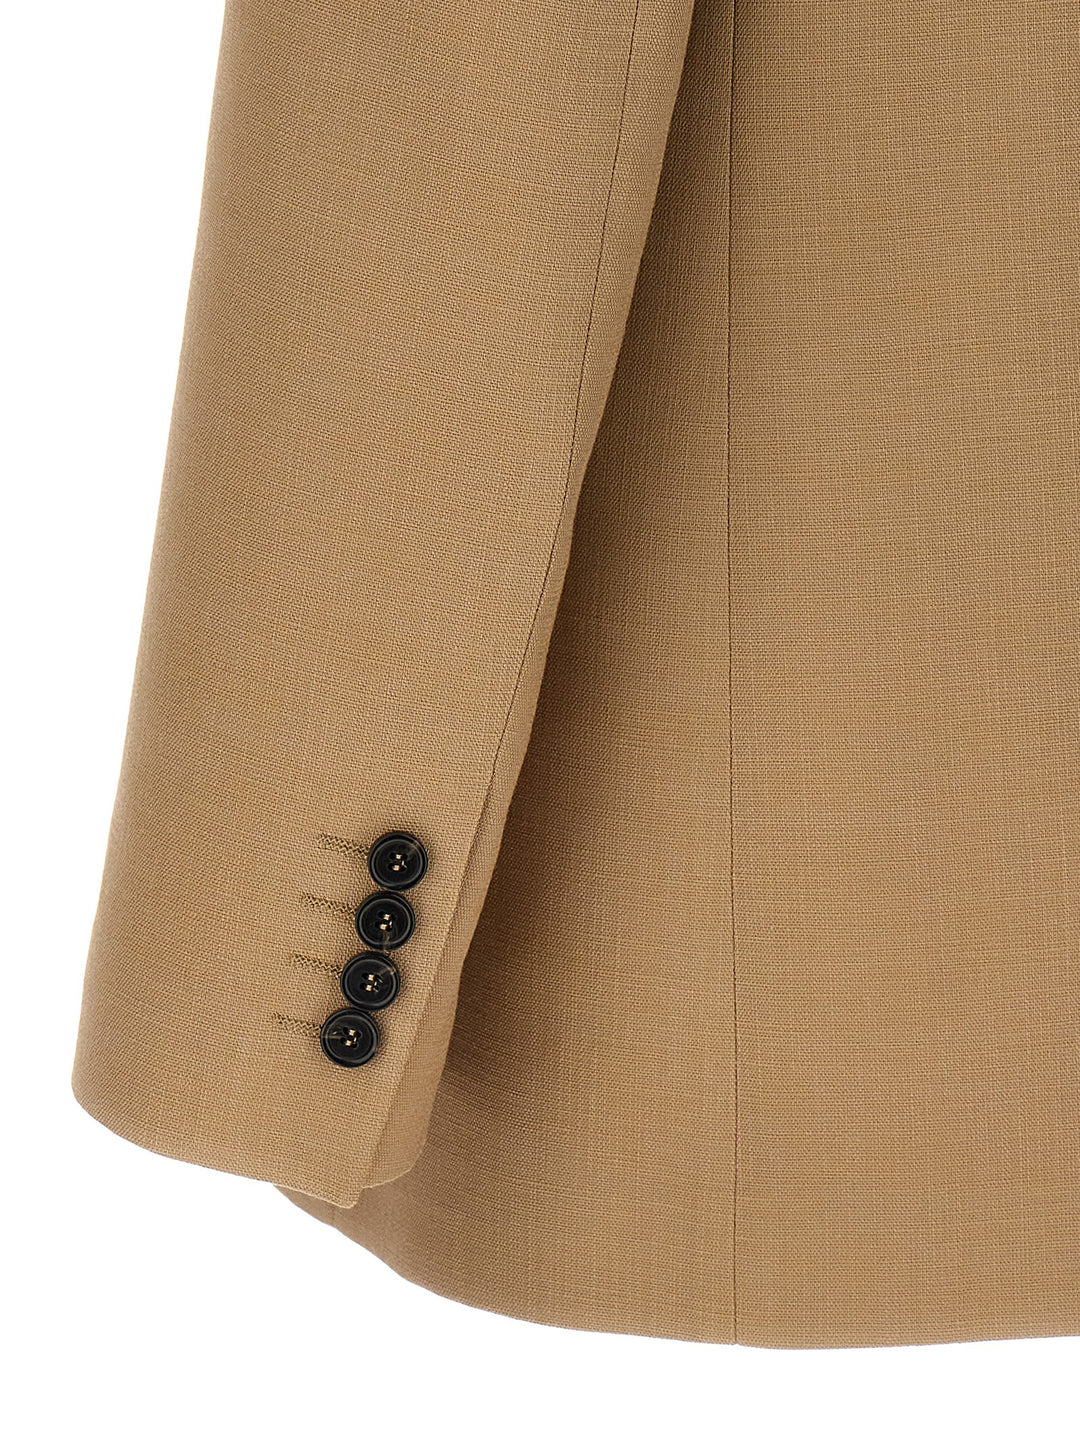 Double-Breasted Blazer Blazer And Suits Beige